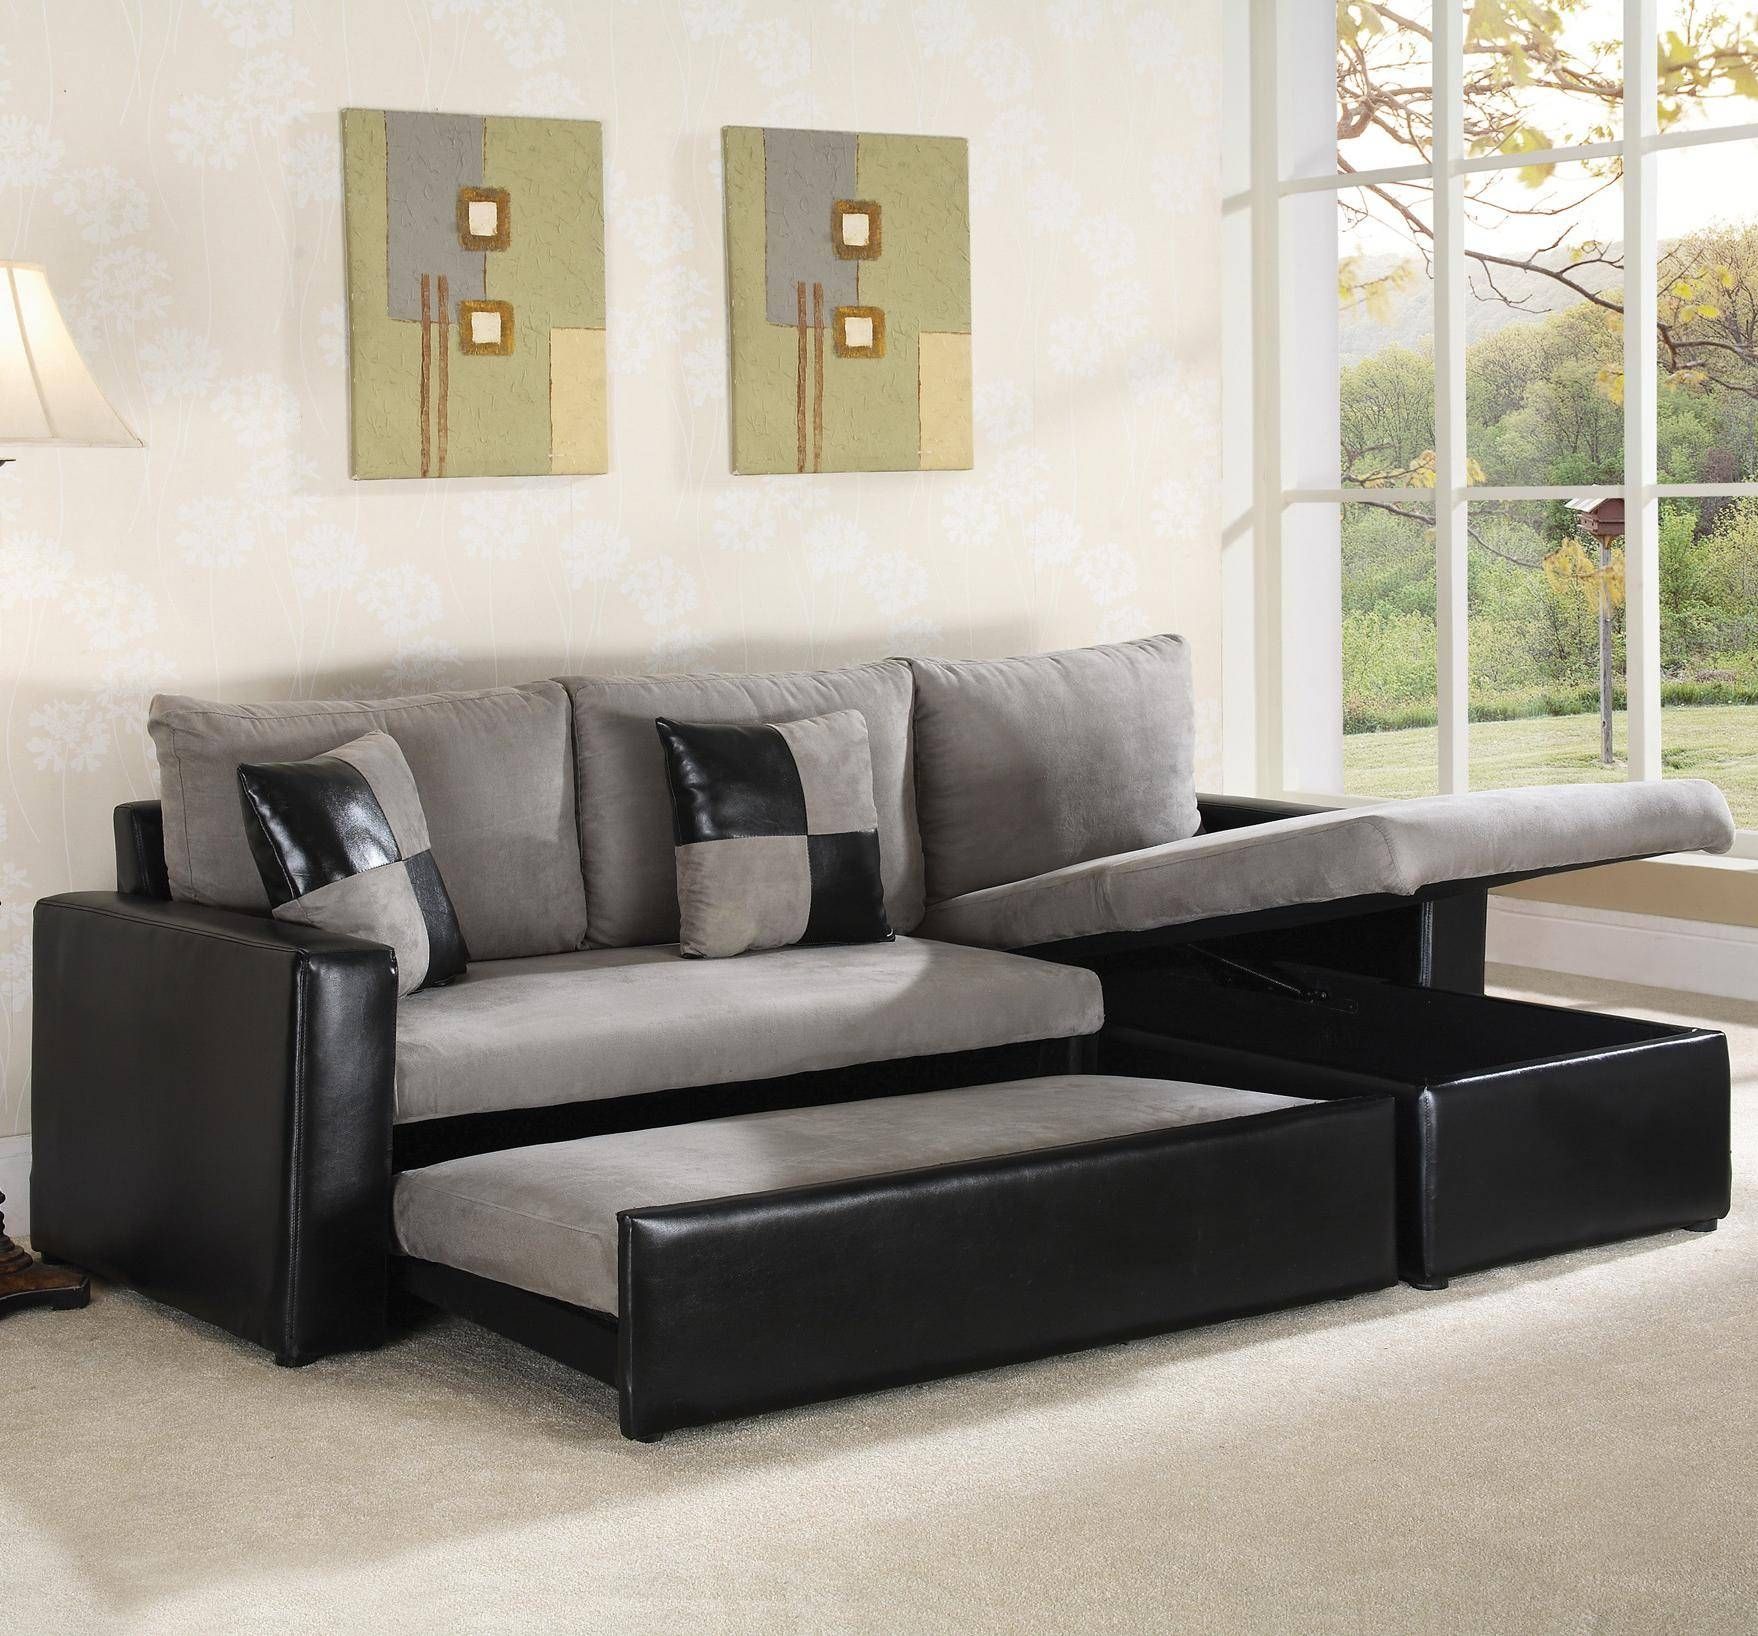 Outstanding Small Black Leather Sectional Sofa 97 On 6 Piece For 6 Piece Modular Sectional Sofa (Photo 27 of 30)